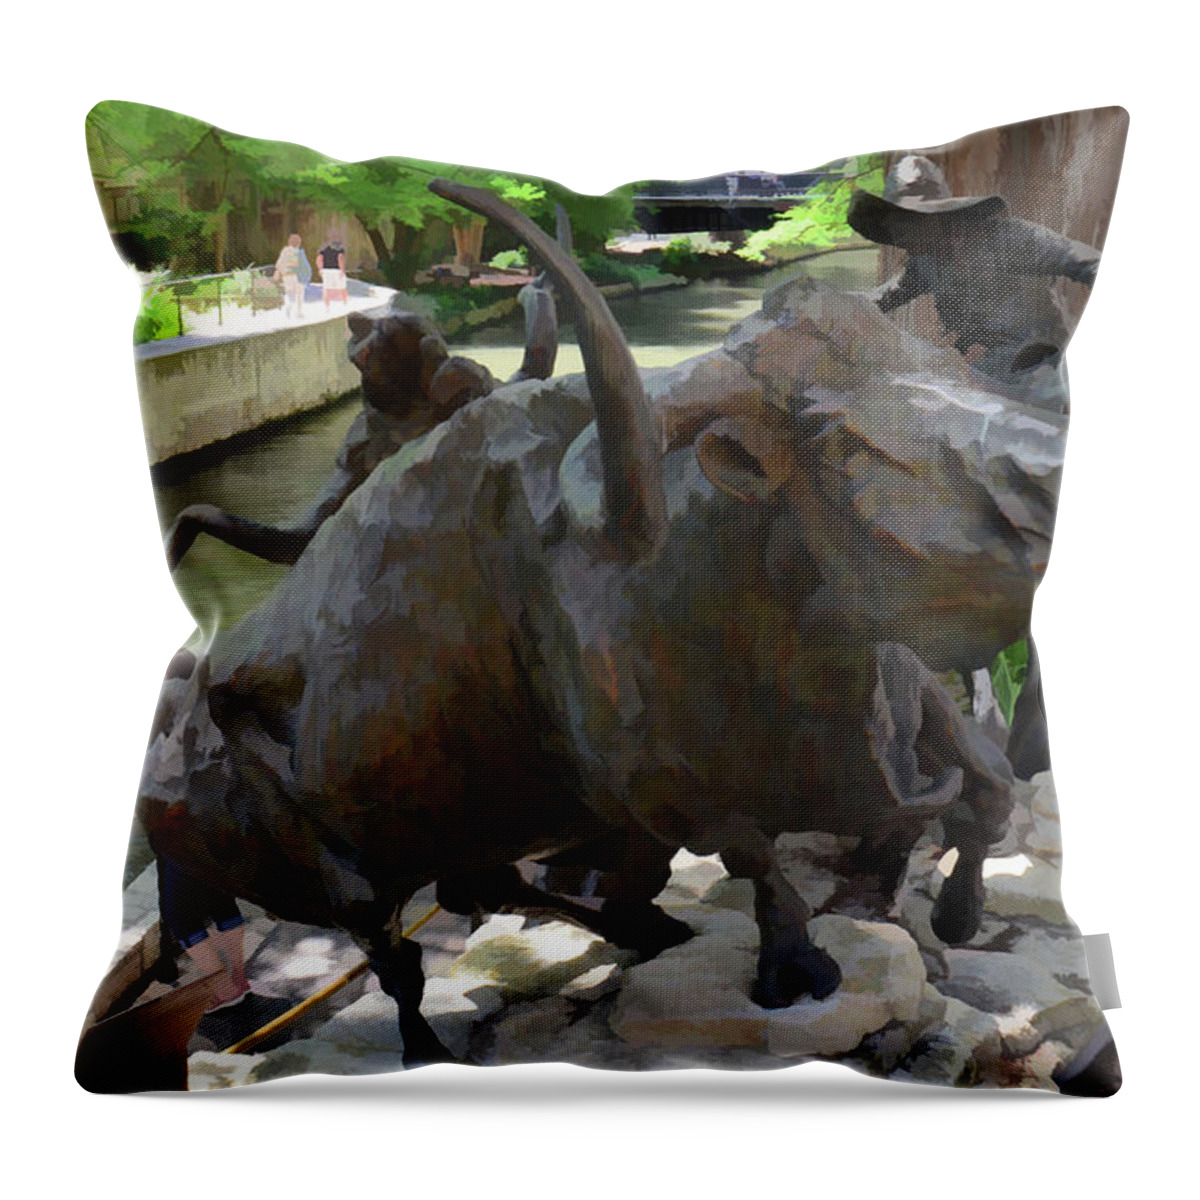 San Antonio Throw Pillow featuring the photograph Cattle Drive by Segura Shaw Photography